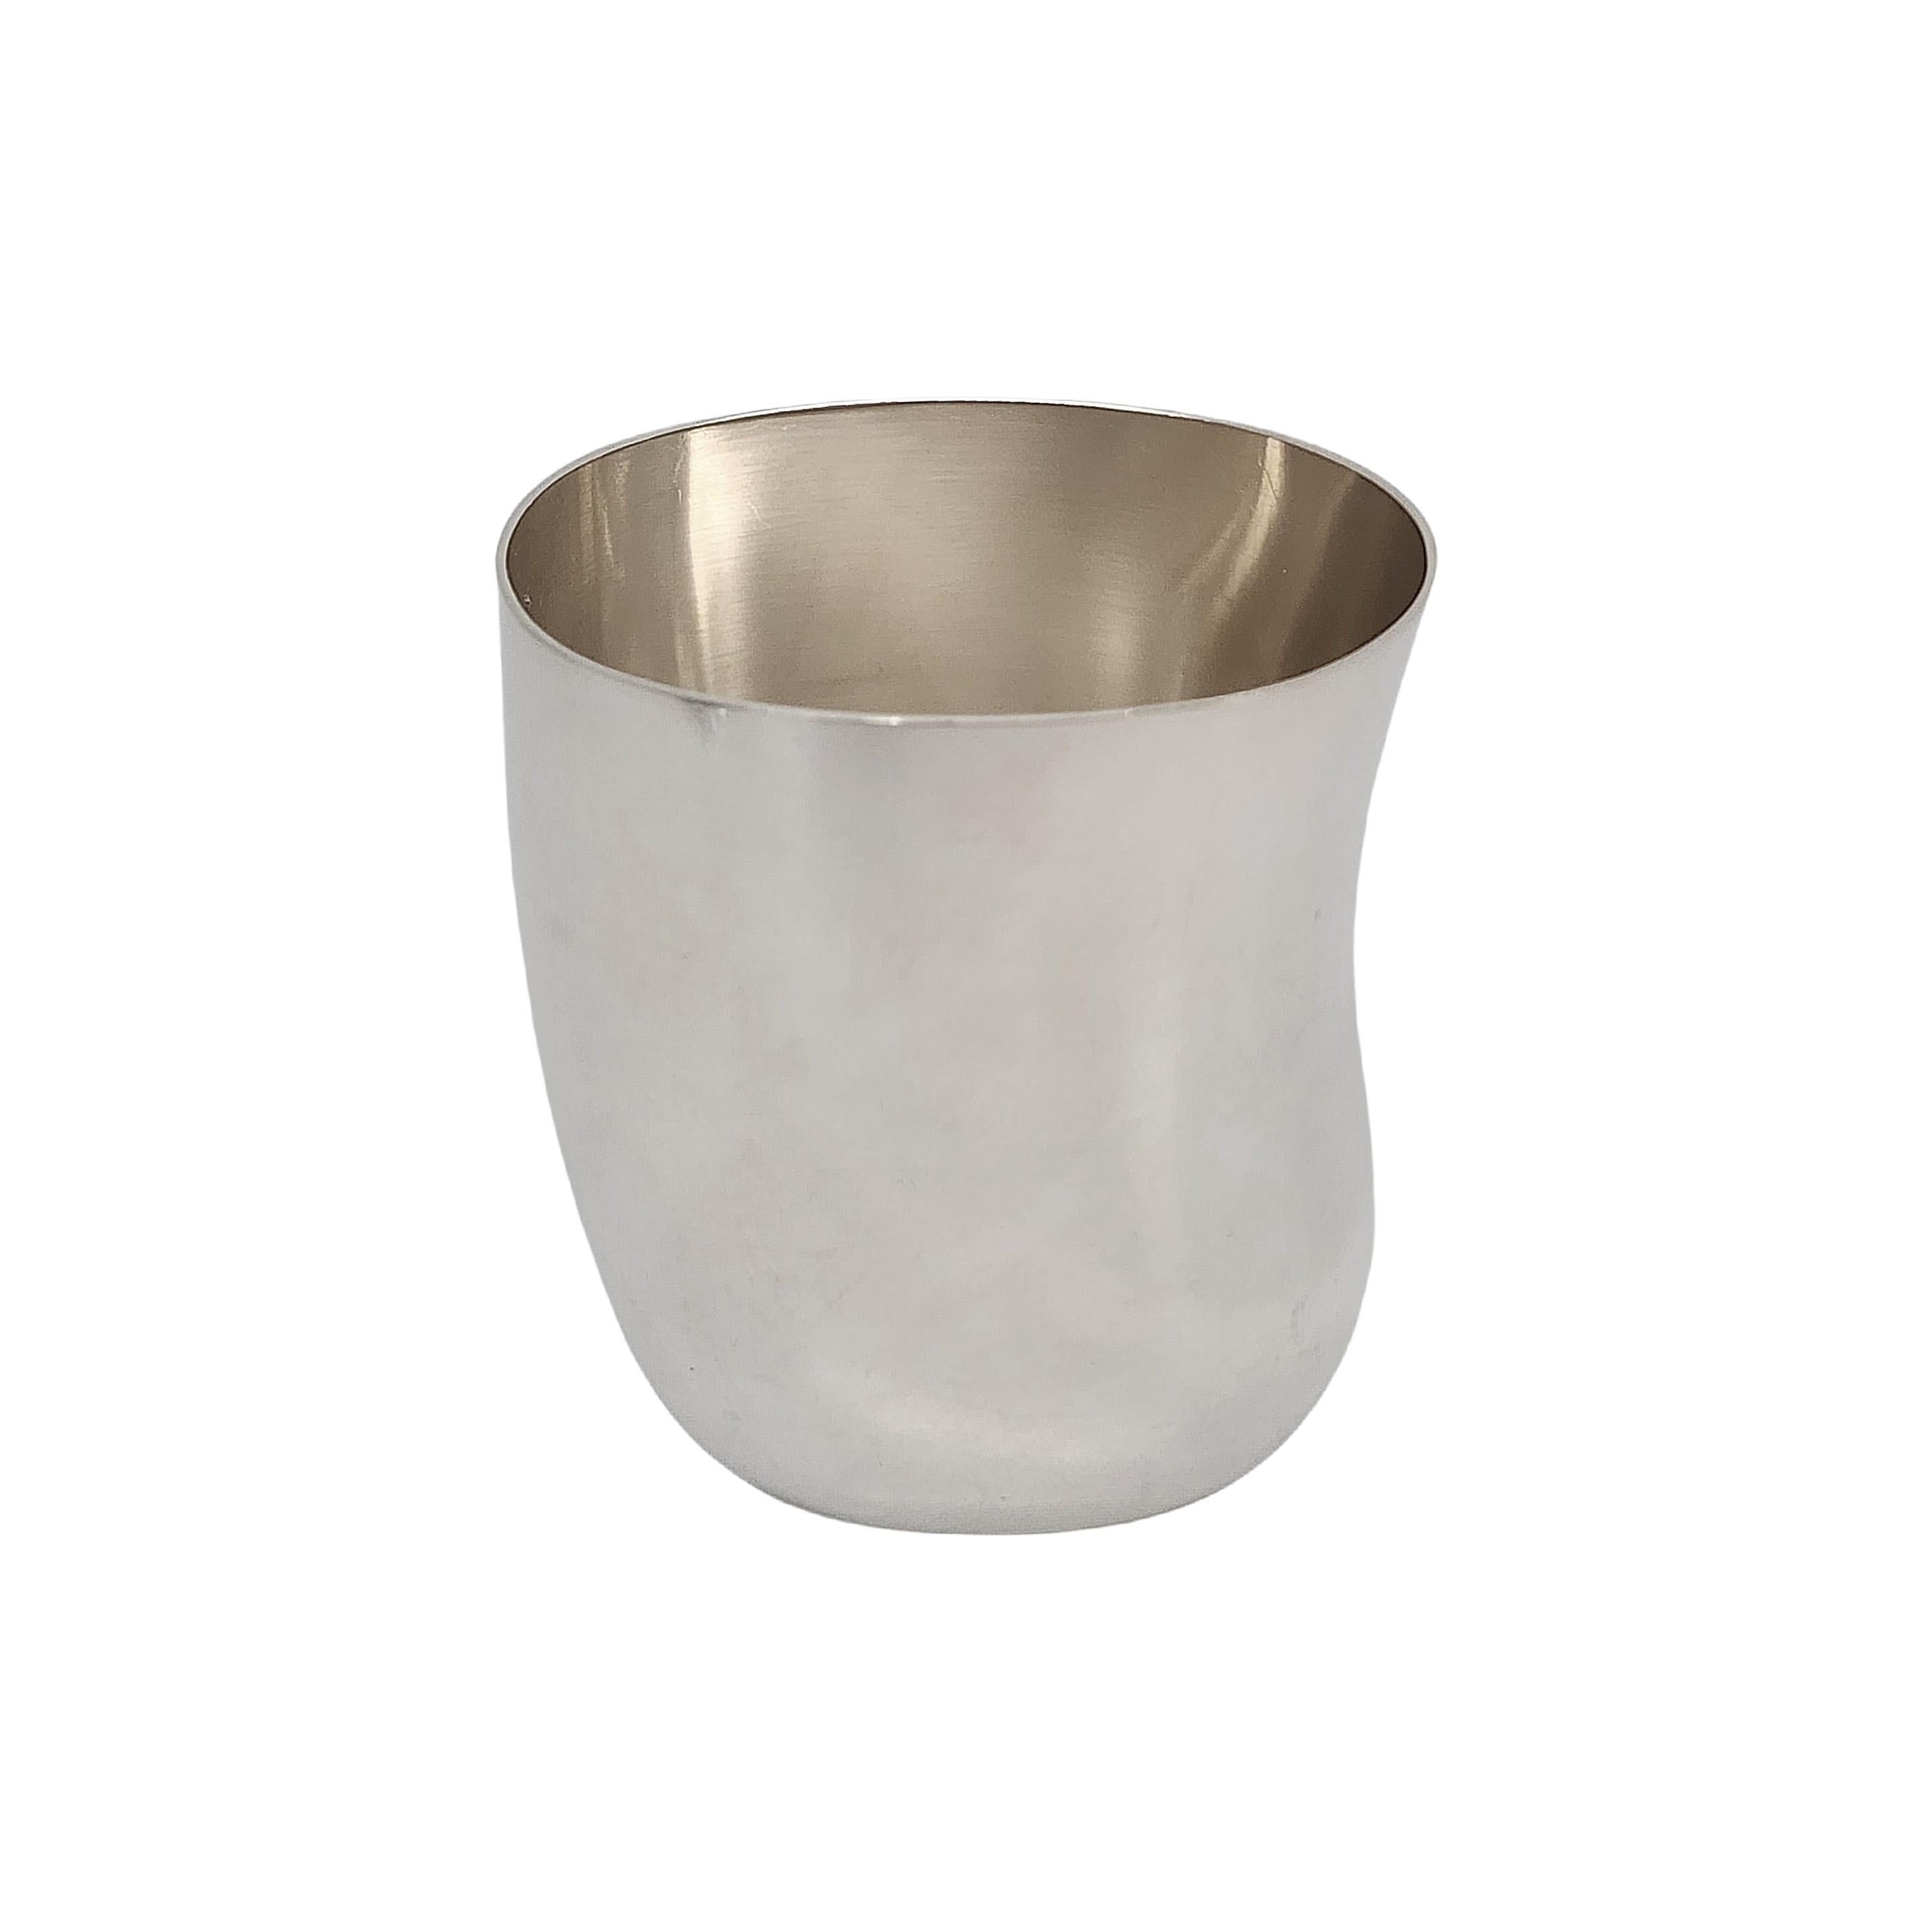 Vintage Gucci sterling silver baby cup.

No monogram

From the Tom Ford Era at Gucci, circa 1990's, this baby cup is engraved with 